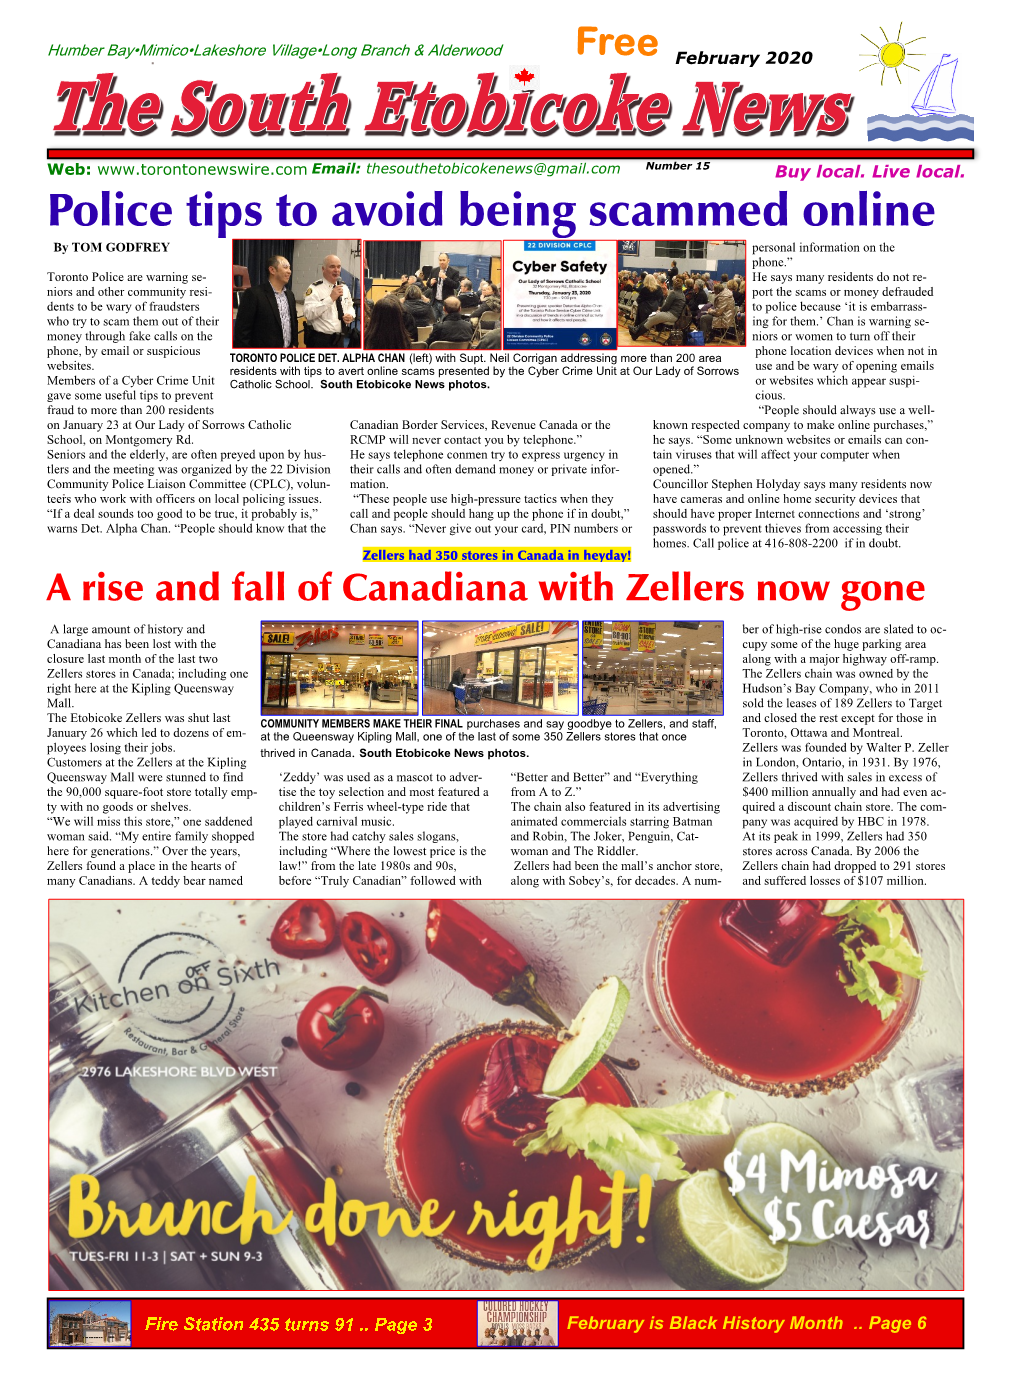 Police Tips to Avoid Being Scammed Online